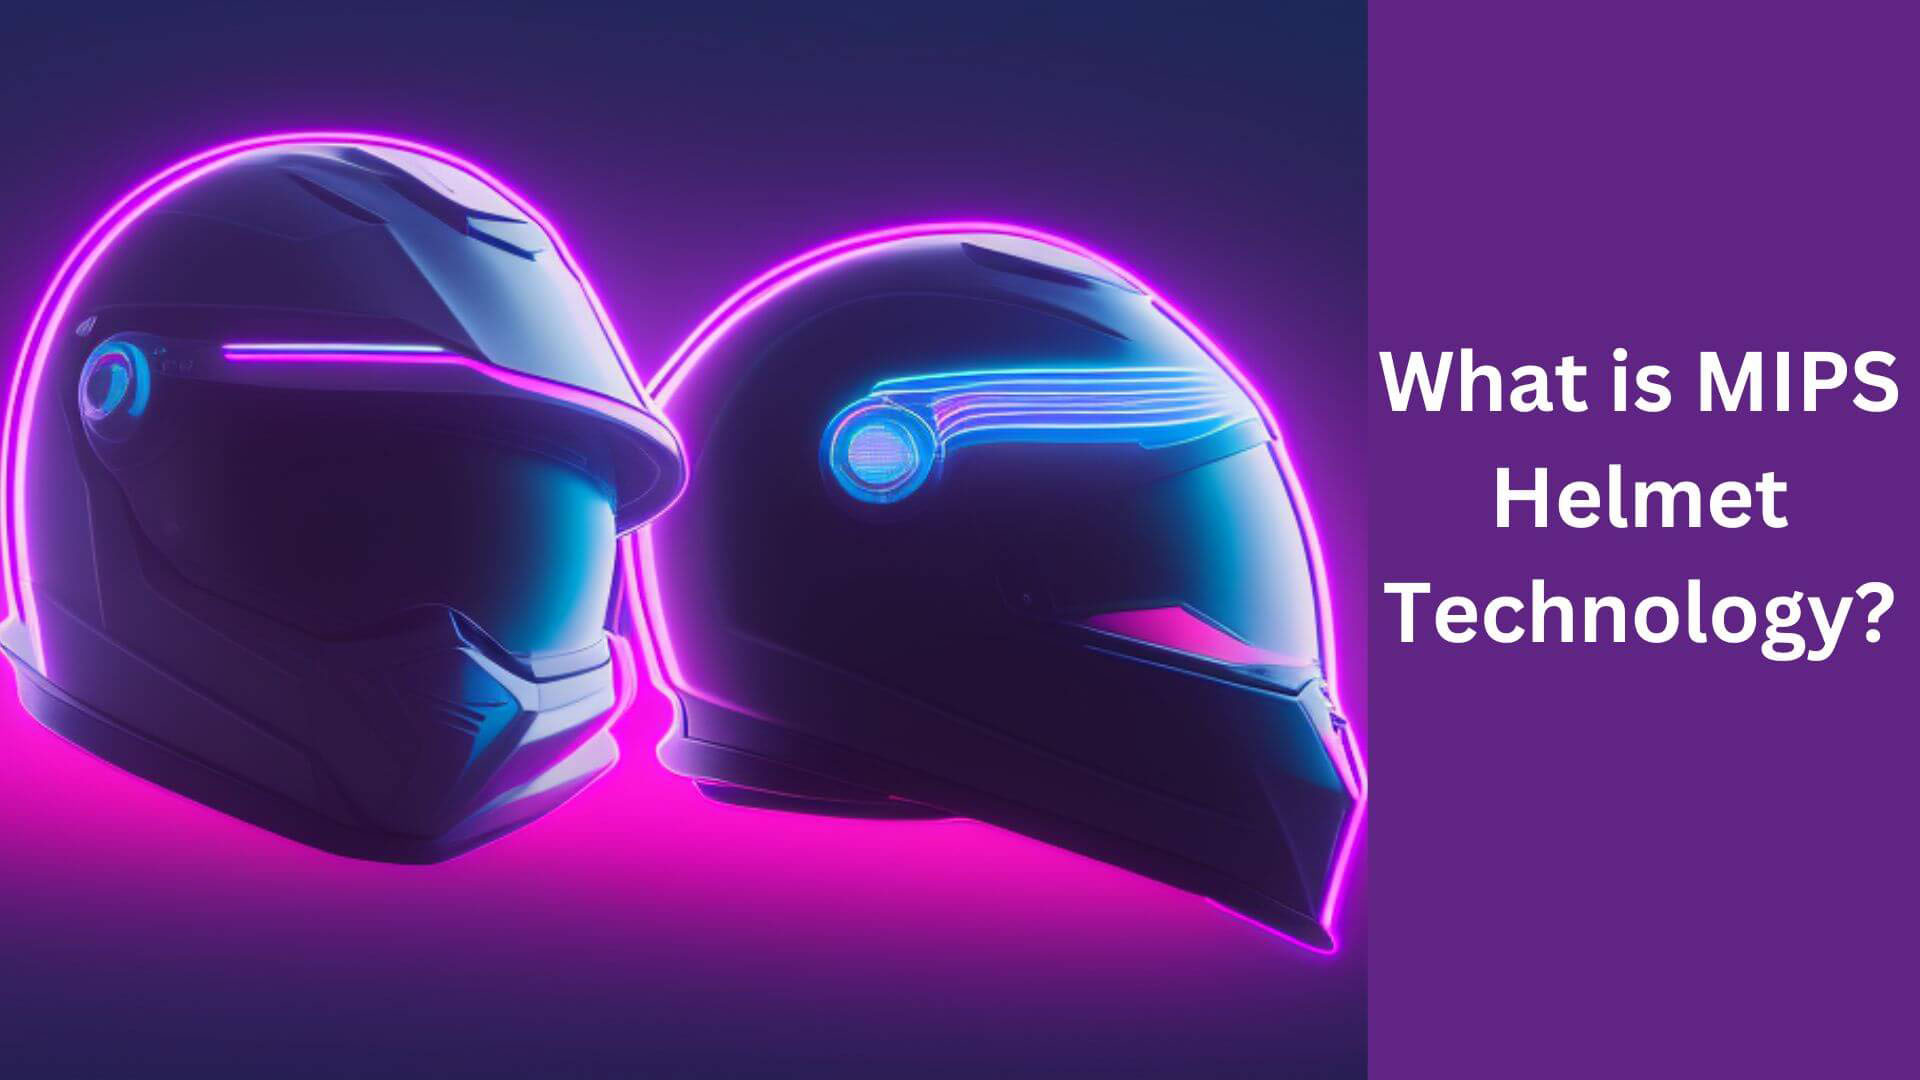 What is MIPS Helmet Technology and How Can You Benefit?